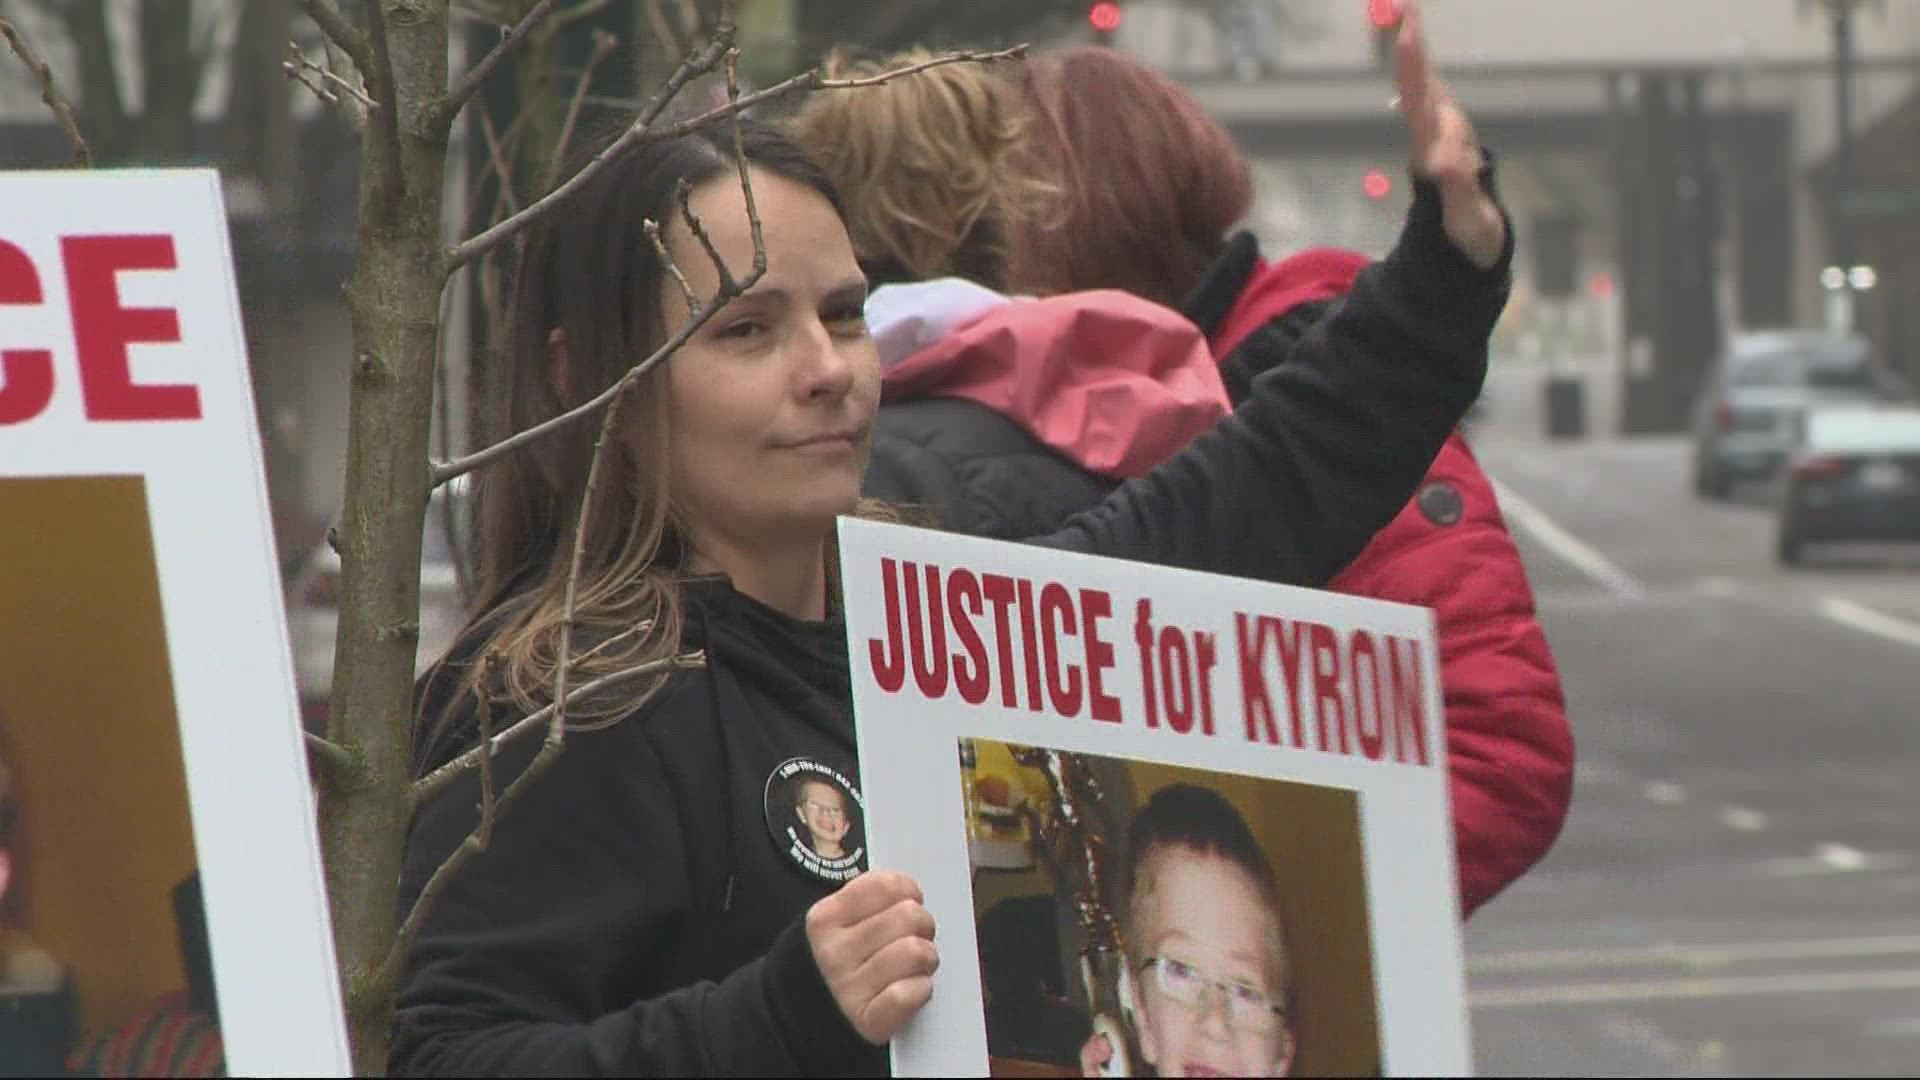 Kyron Horman disappeared from school in Portland in 2010, at age 7. His mother has been pushing for a greater effort to solve the case.